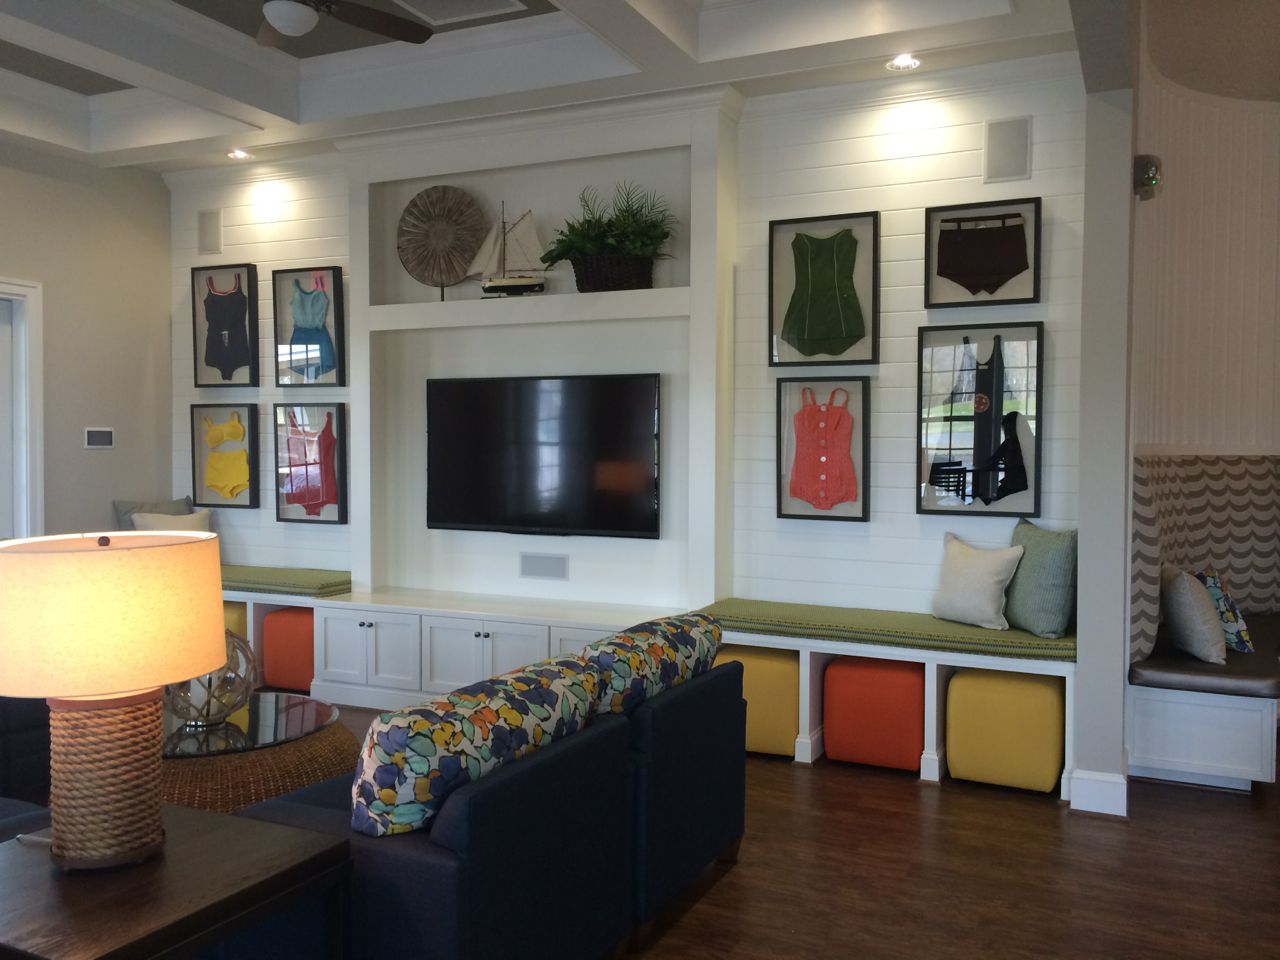 Multifamily clubhouse interior designed with framed vintage swimsuits and bright colors.